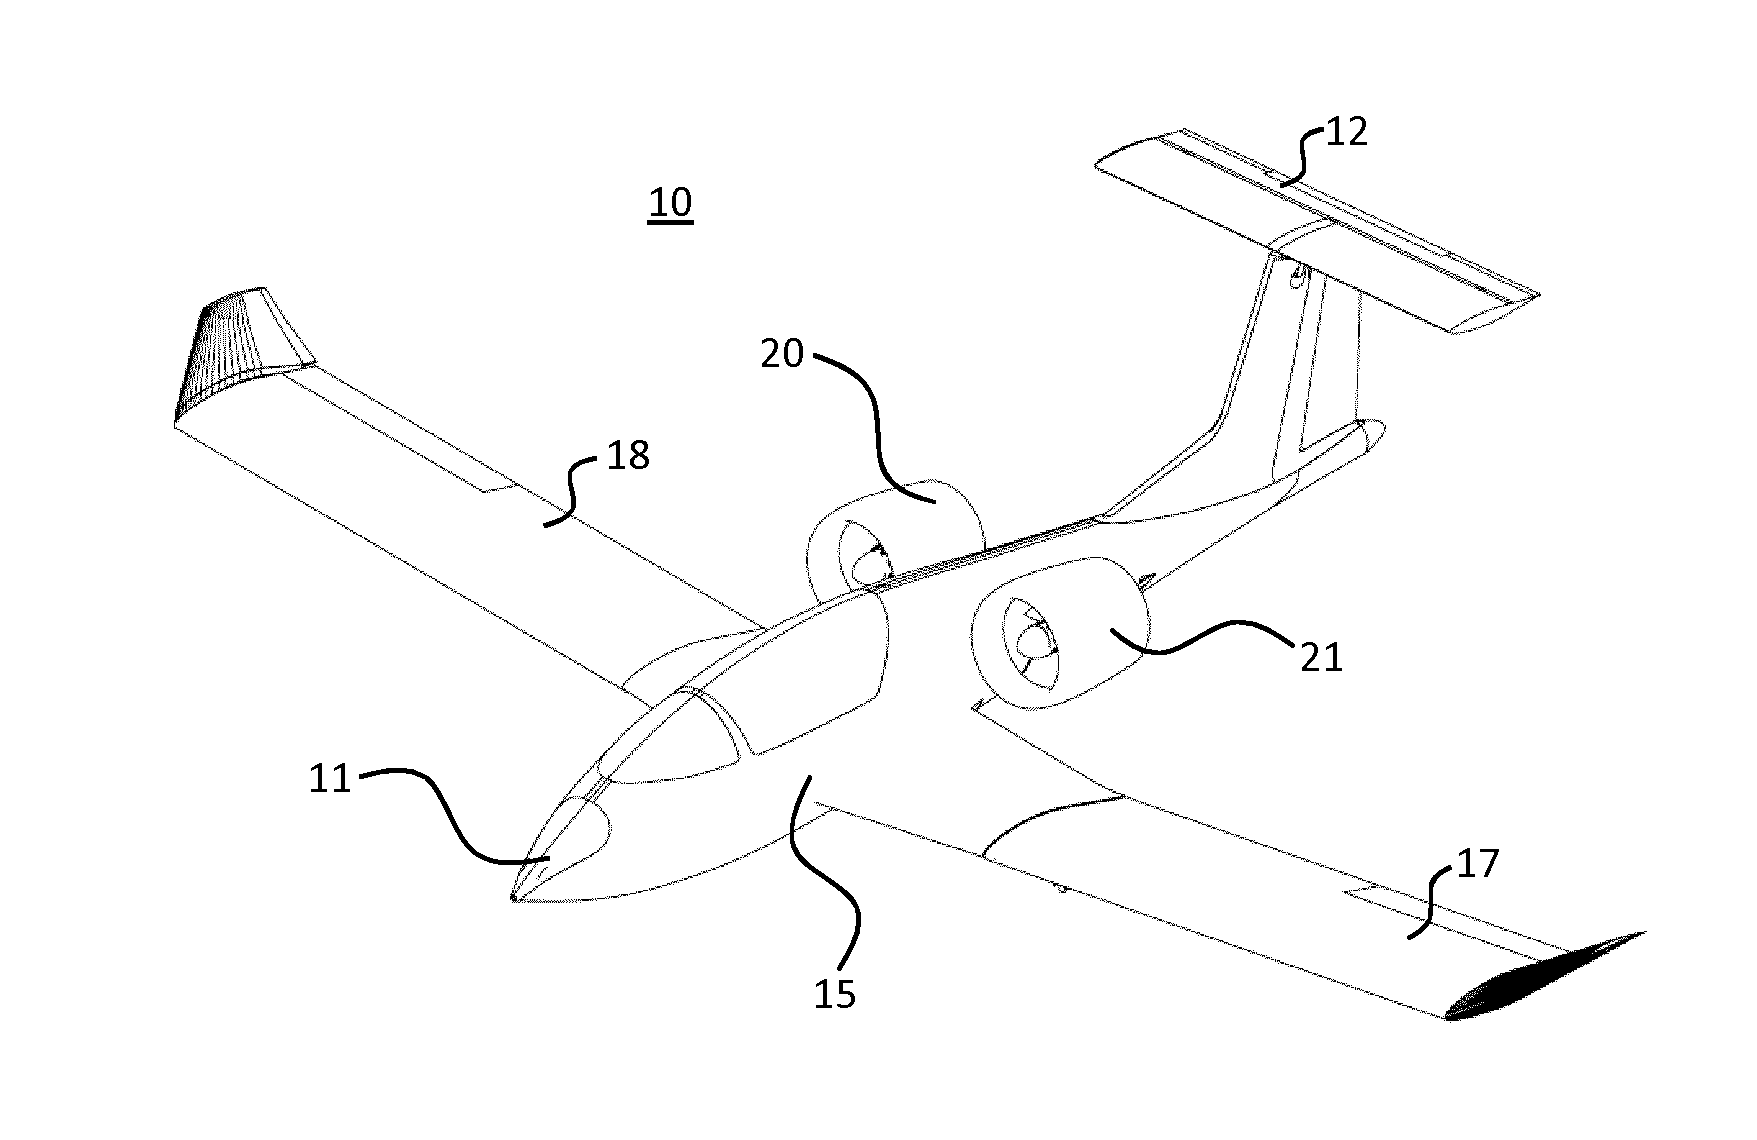 Electrical power supply device for aircraft with electric propulsion